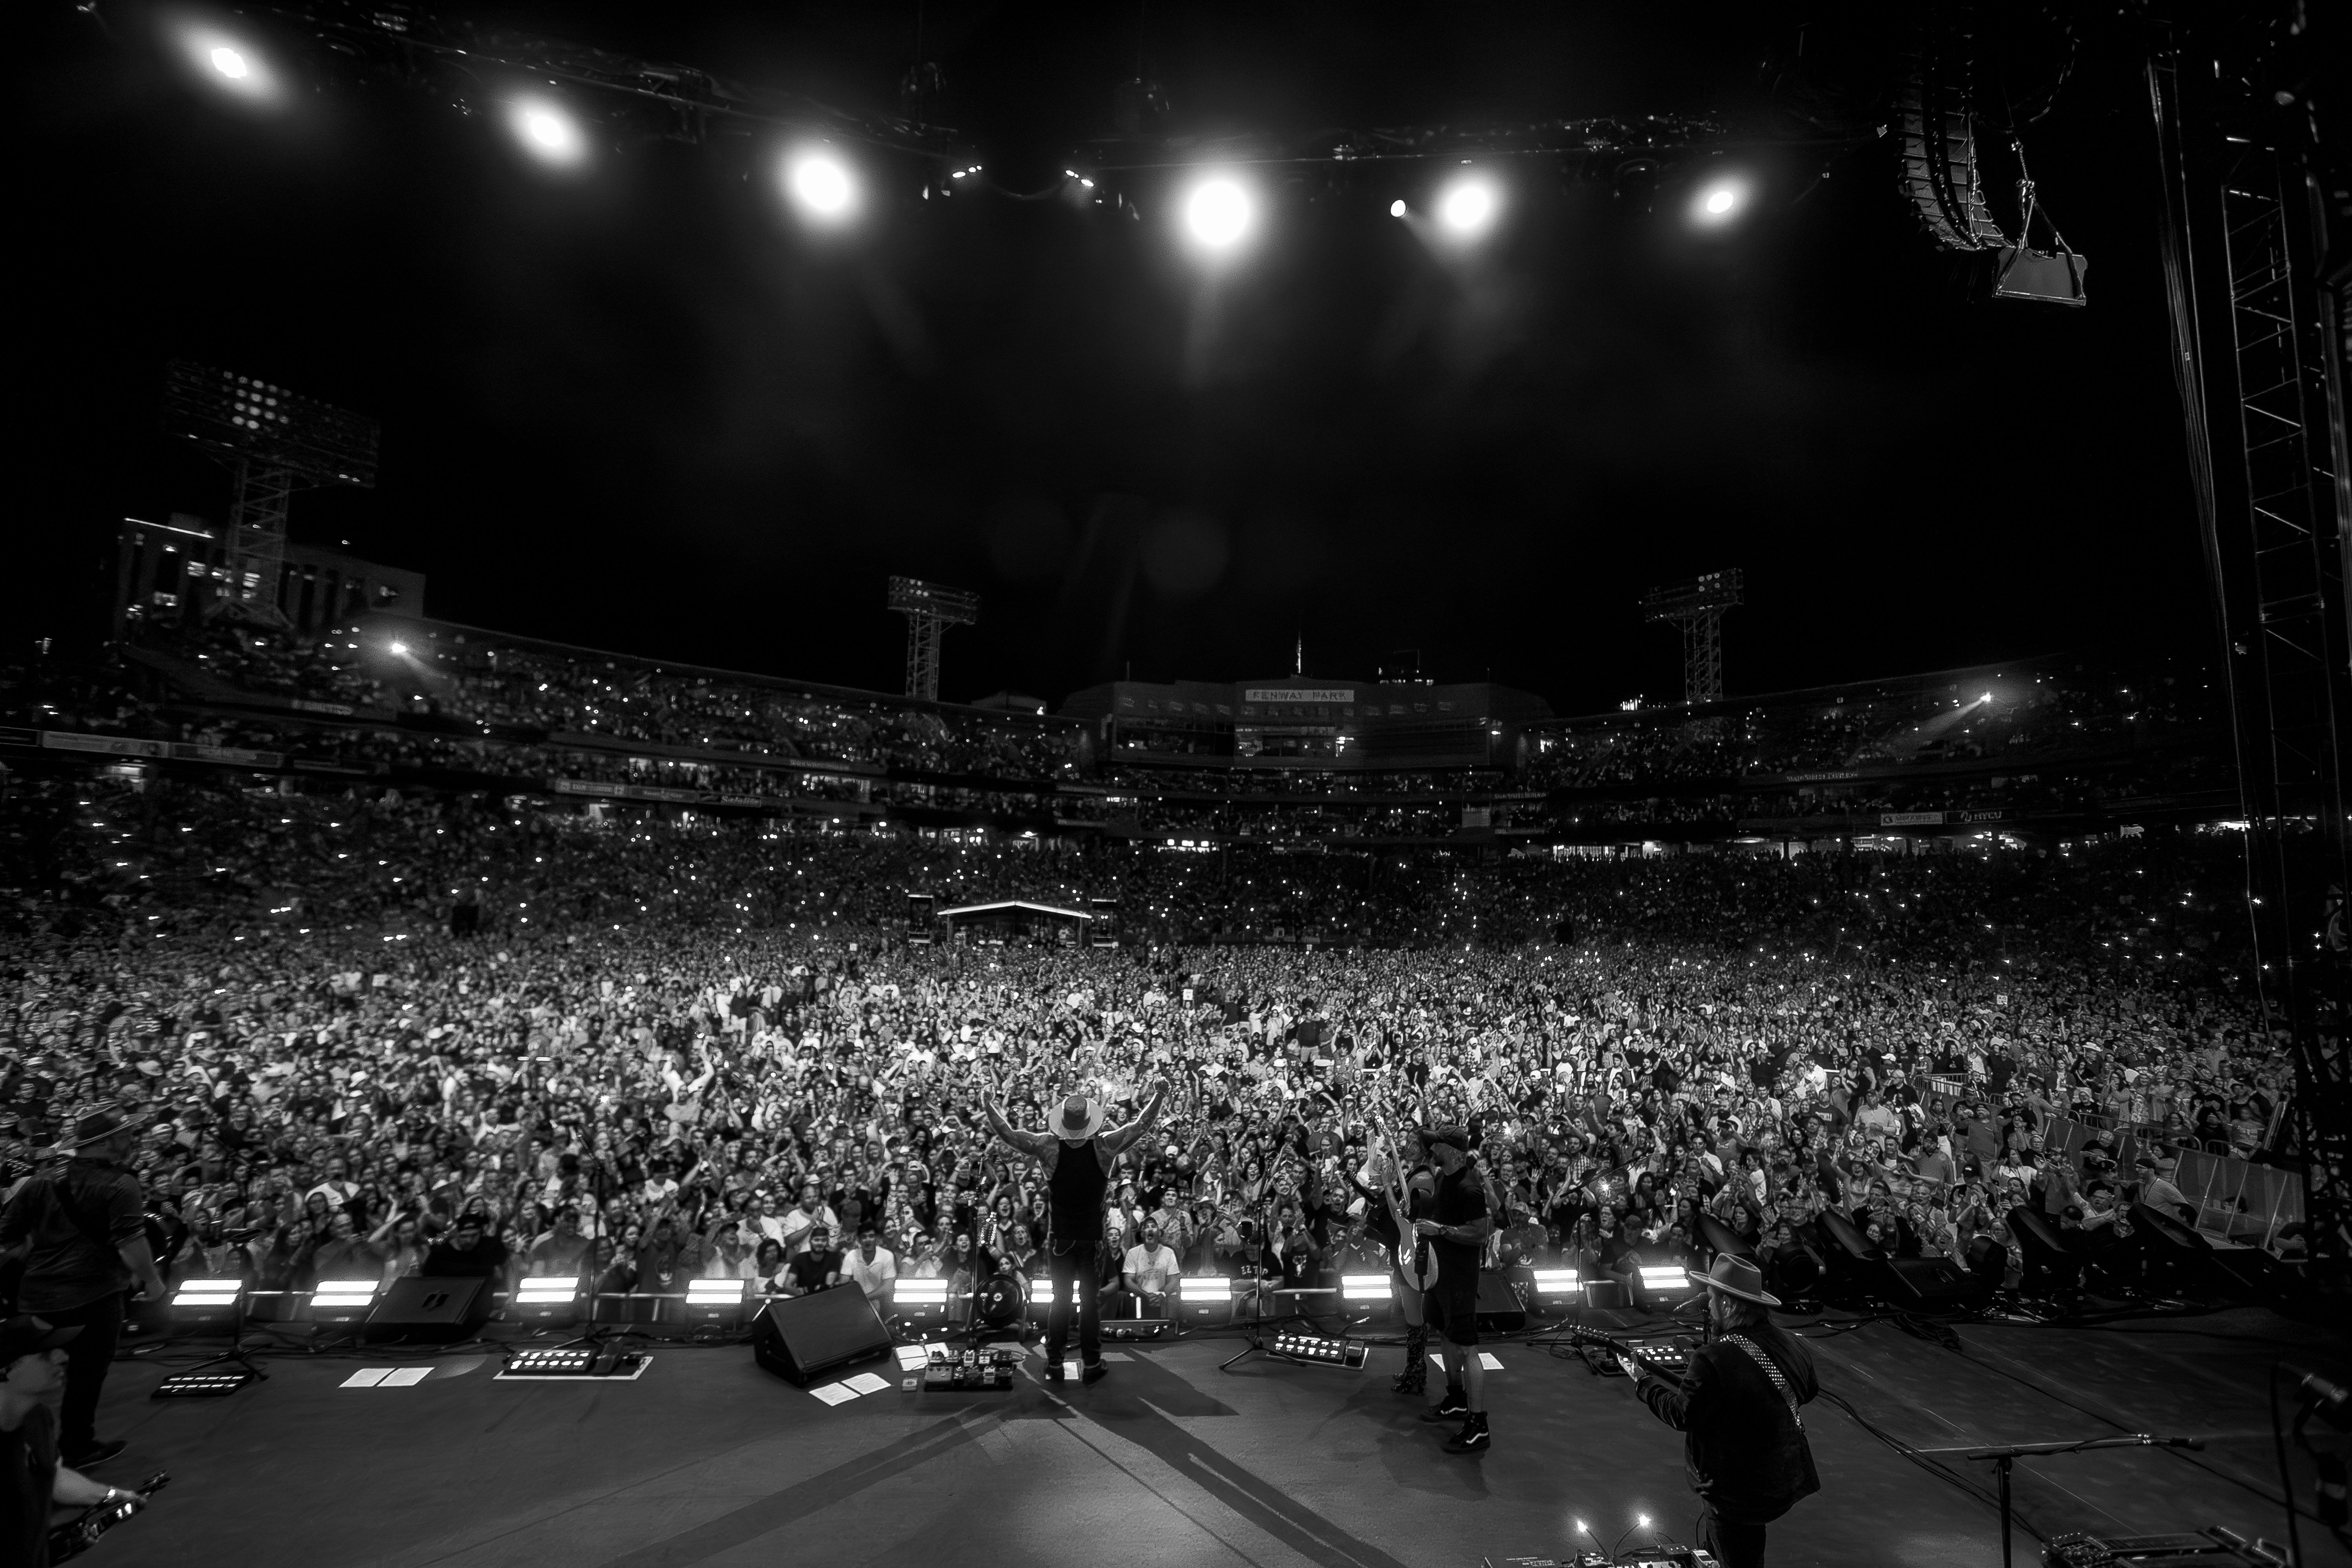 ZAC BROWN BAND MAKES HISTORY SELLING OUT FENWAY PARK FOR THE 14TH TIME, MARKING THE ICONIC STADIUM’S 100TH CONCERT